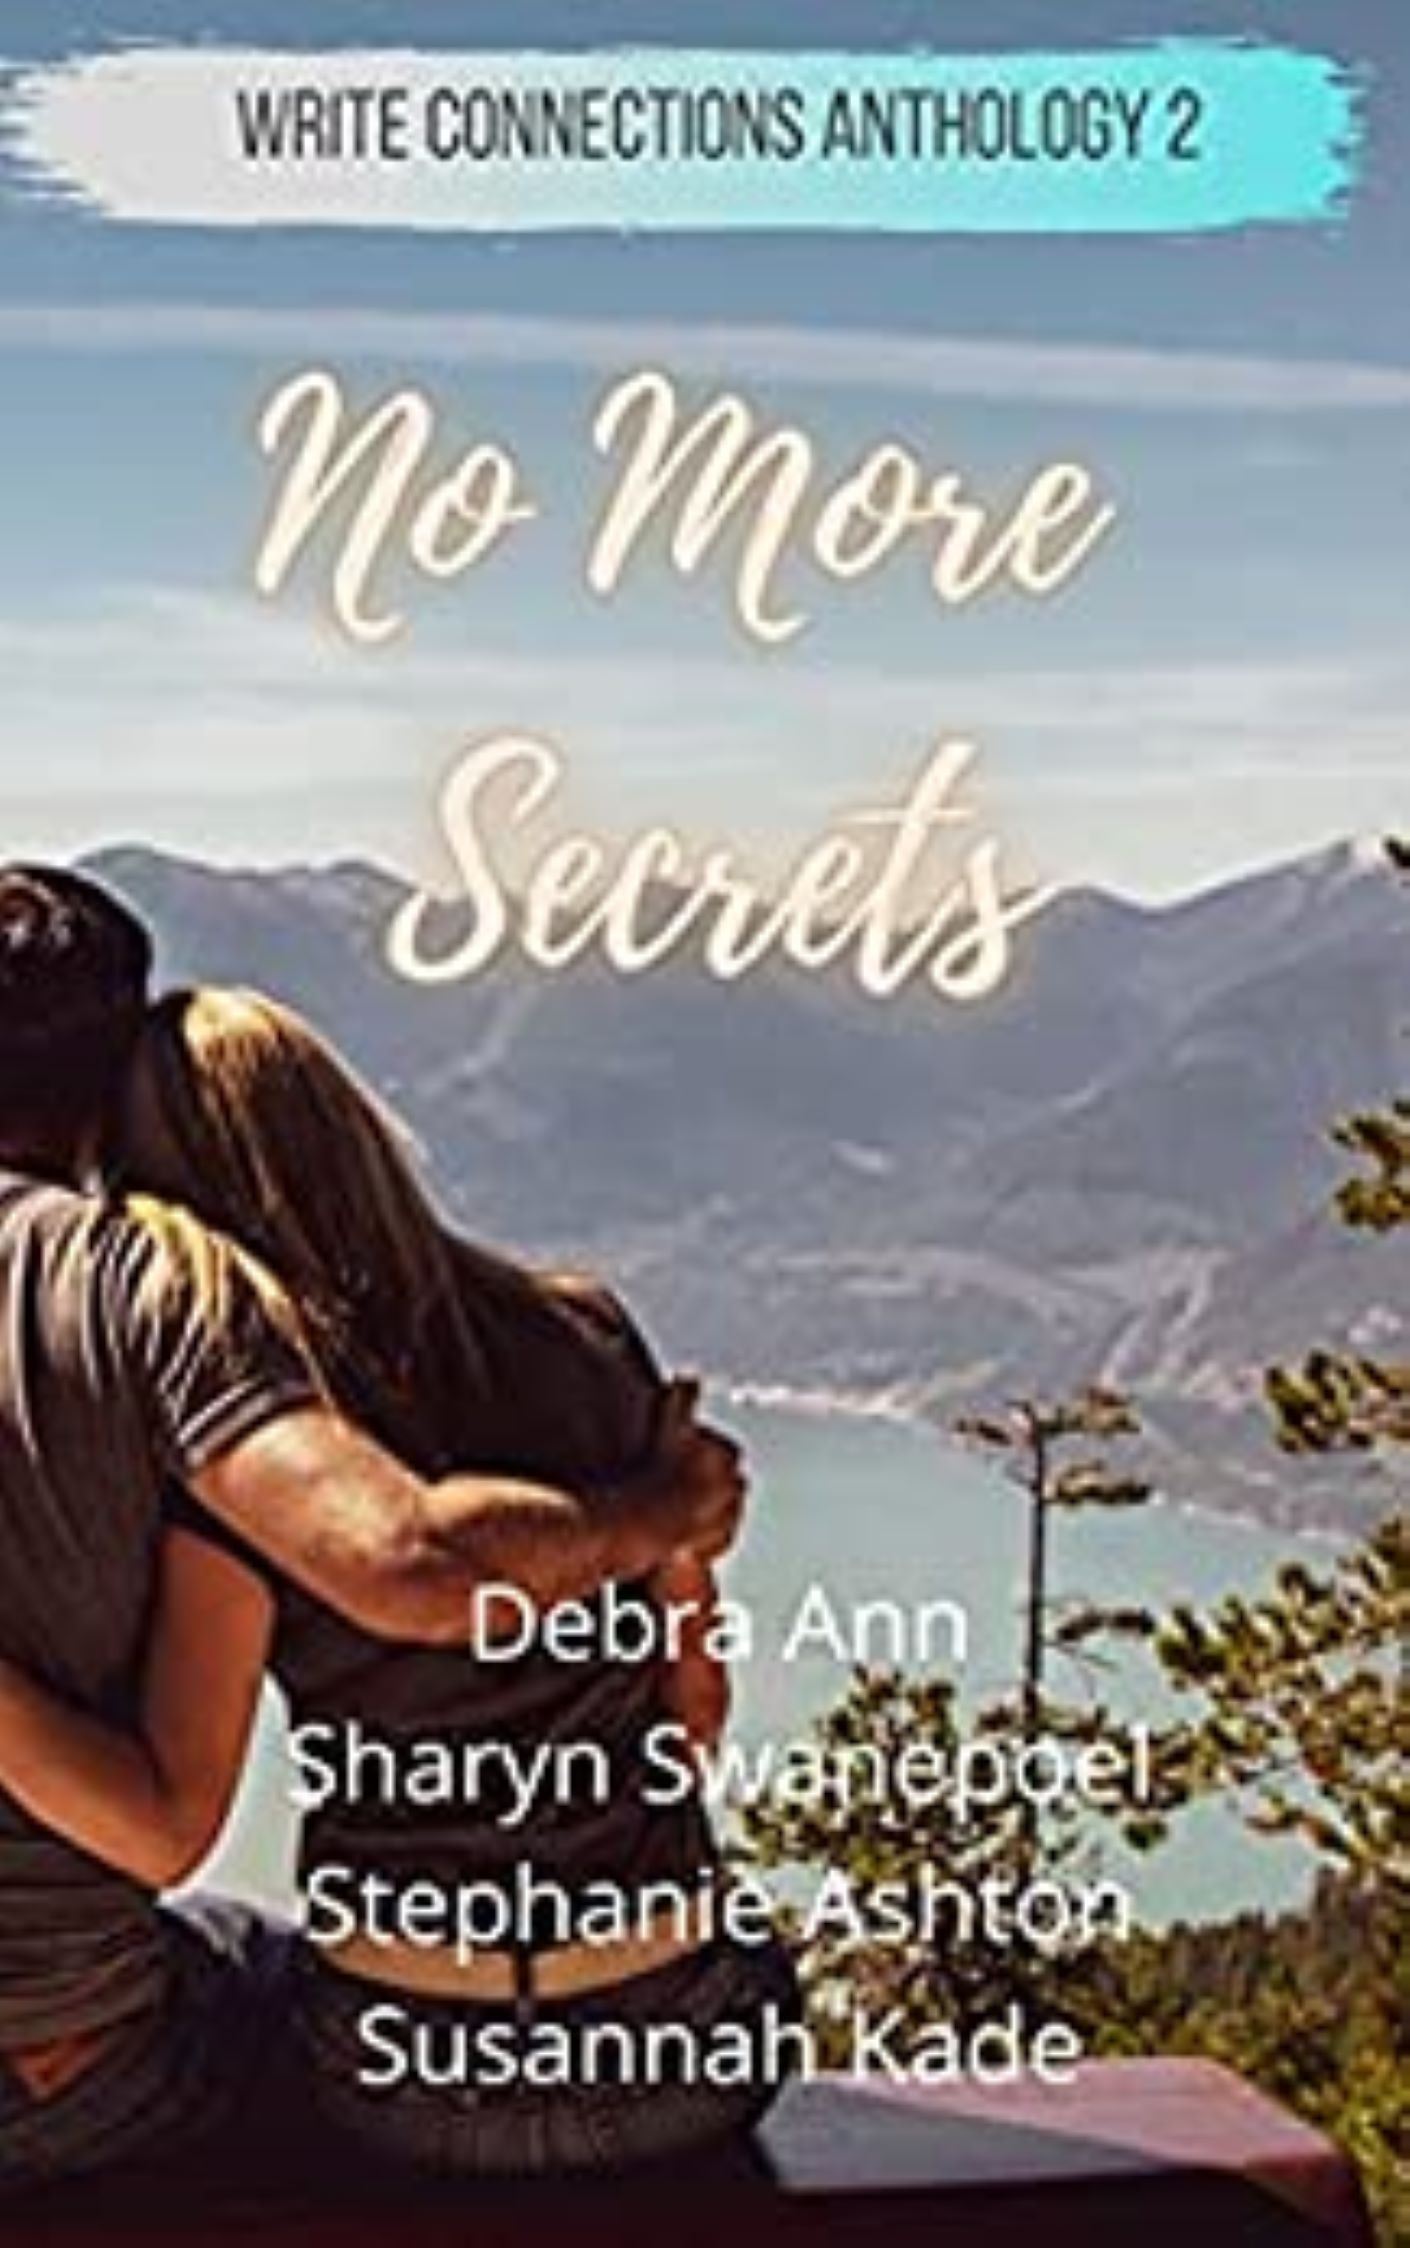 Picture of the book cover for No More Secrets showing a couple embracing overlooking a mountain lake scene